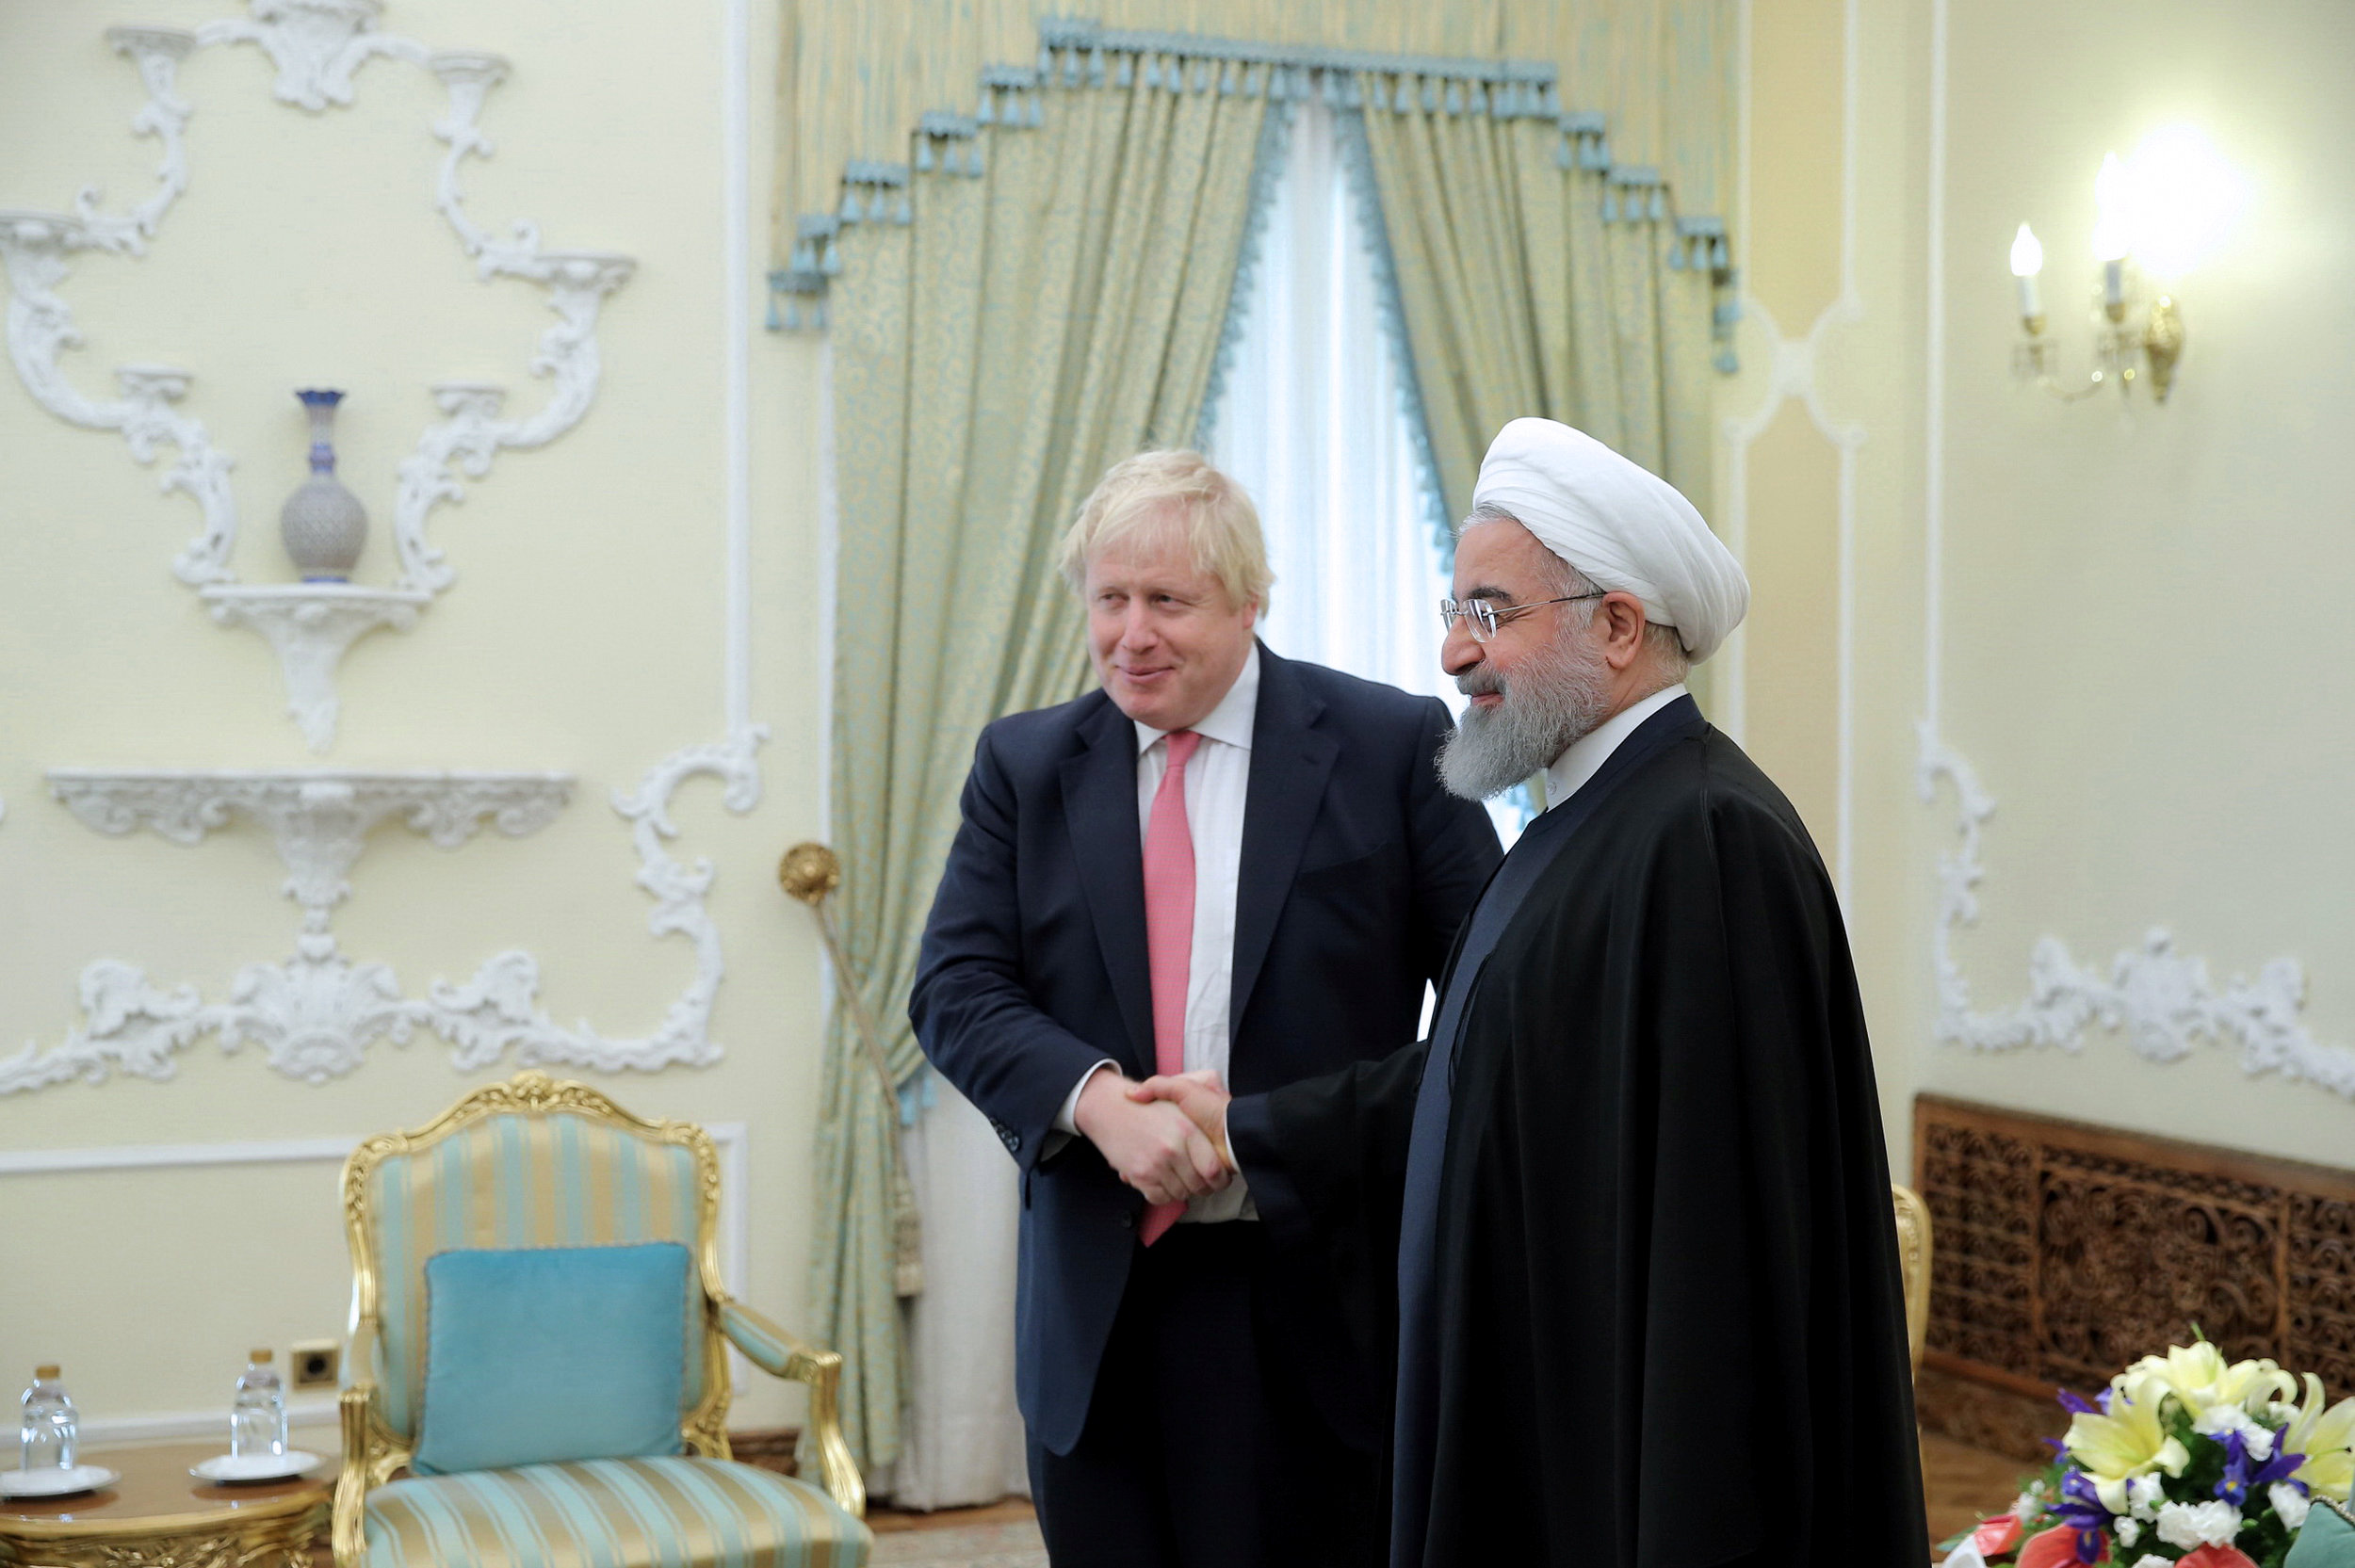 Boris meets Rouhani, pushes for release of jailed dual nationals